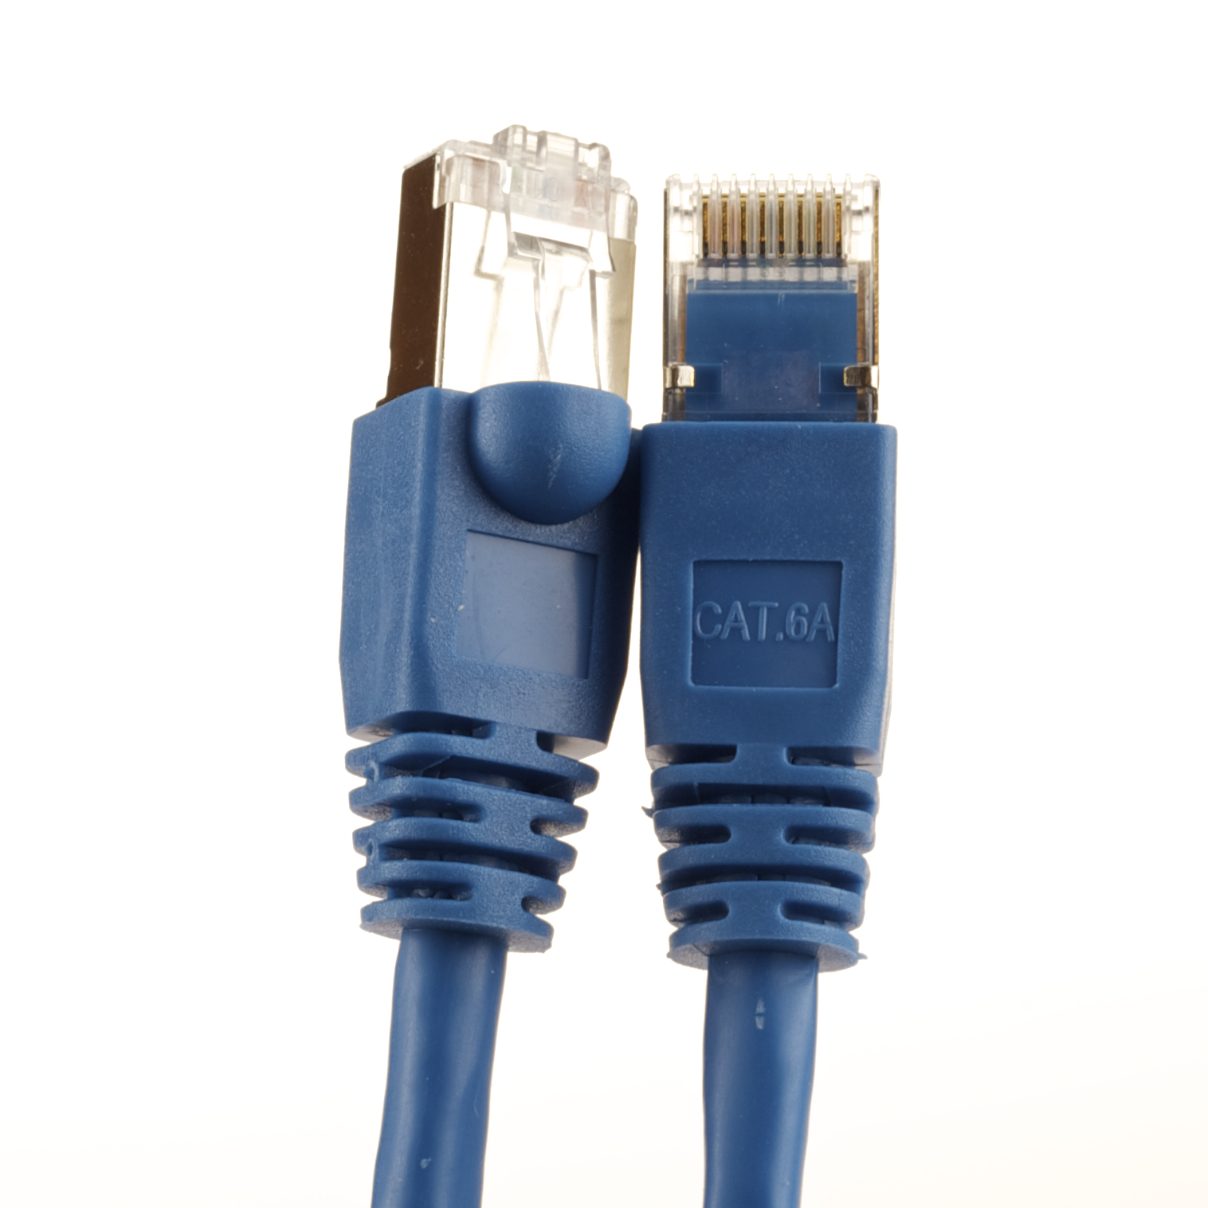 Category 6A Shielded cables